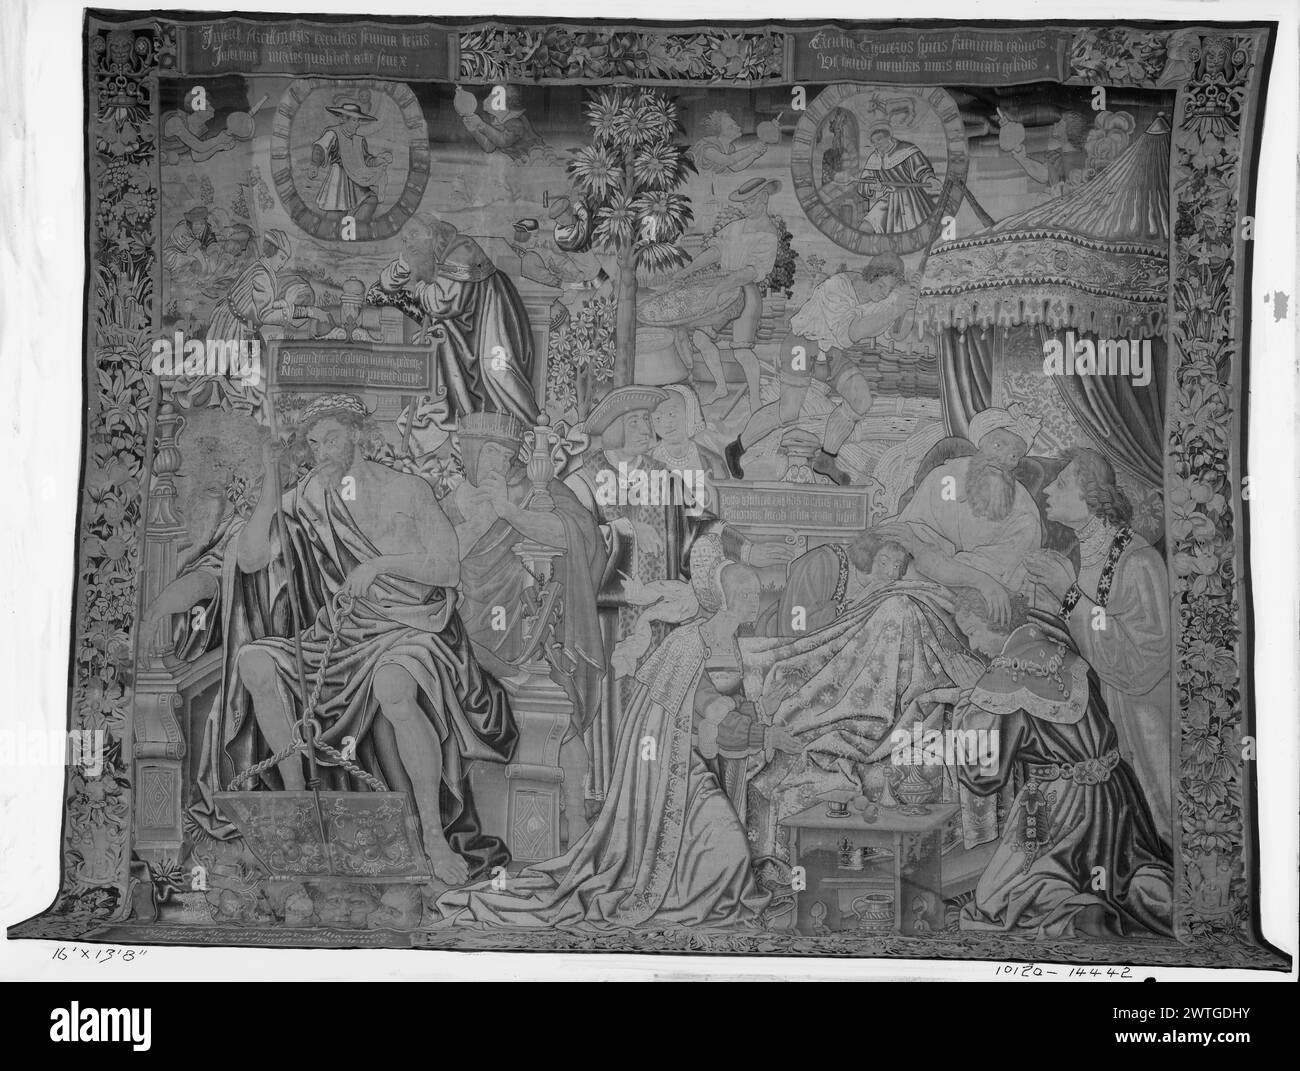 Last three Ages of Man (54-60). unknown c. 1525-1540 Tapestry Dimensions: H 13'8' x W 16' Tapestry Materials/Techniques: unknown Culture: Southern Netherlands Weaving Center: unknown Ownership History: French & Co. Inscriptions: Inscription in central field (L) [mostly legible in photograph]:.. TOBIAN/NATU SOPHROSYNEN CU[M] PIETATE DOCET Inscriptions: Inscription in central field (R) [mostly legible in photograph]:.. SPIRITUS ARTUS/.. JACOB.. REGNA SUBIT Inscriptions: Inscription in upper border, left banderole [mostly legible in photograph]: INSERIT.. EXCULTIS SEMINA TERRIS/INSTITUIT.. QUALIB Stock Photo